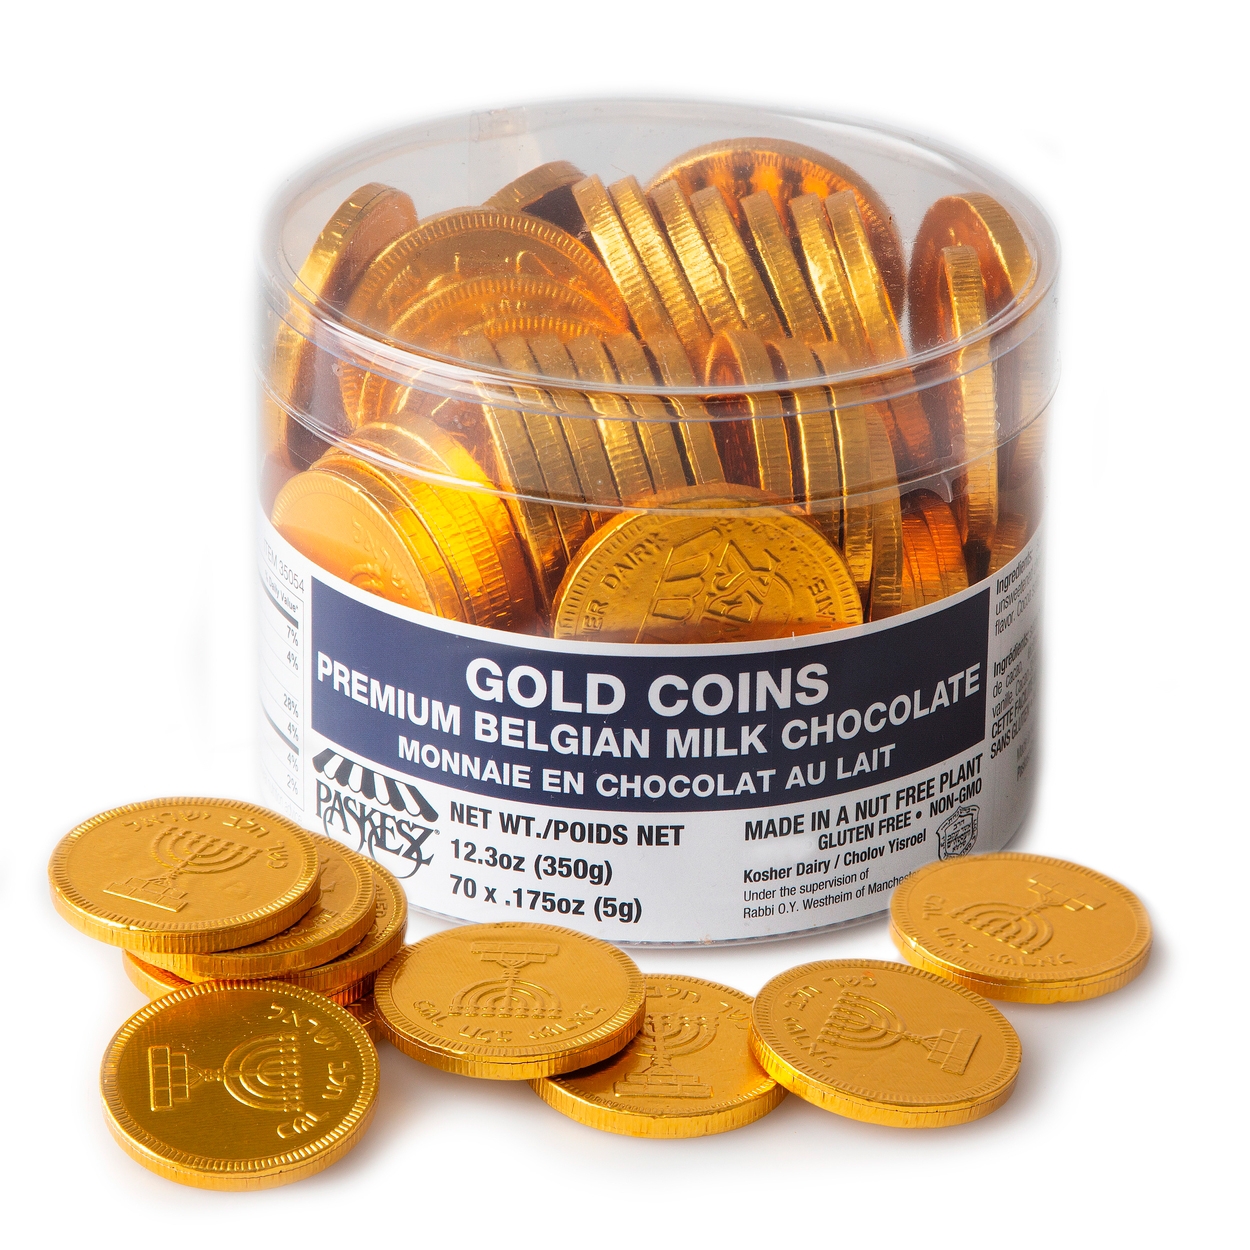 Nut Free - Dairy Chocolate Coins Tub - 12.3oz Tub • Chanukah Gelt / Chocolate Coins • Hanukkah Gifts, Chocolate and Baskets • Oh! Nuts®